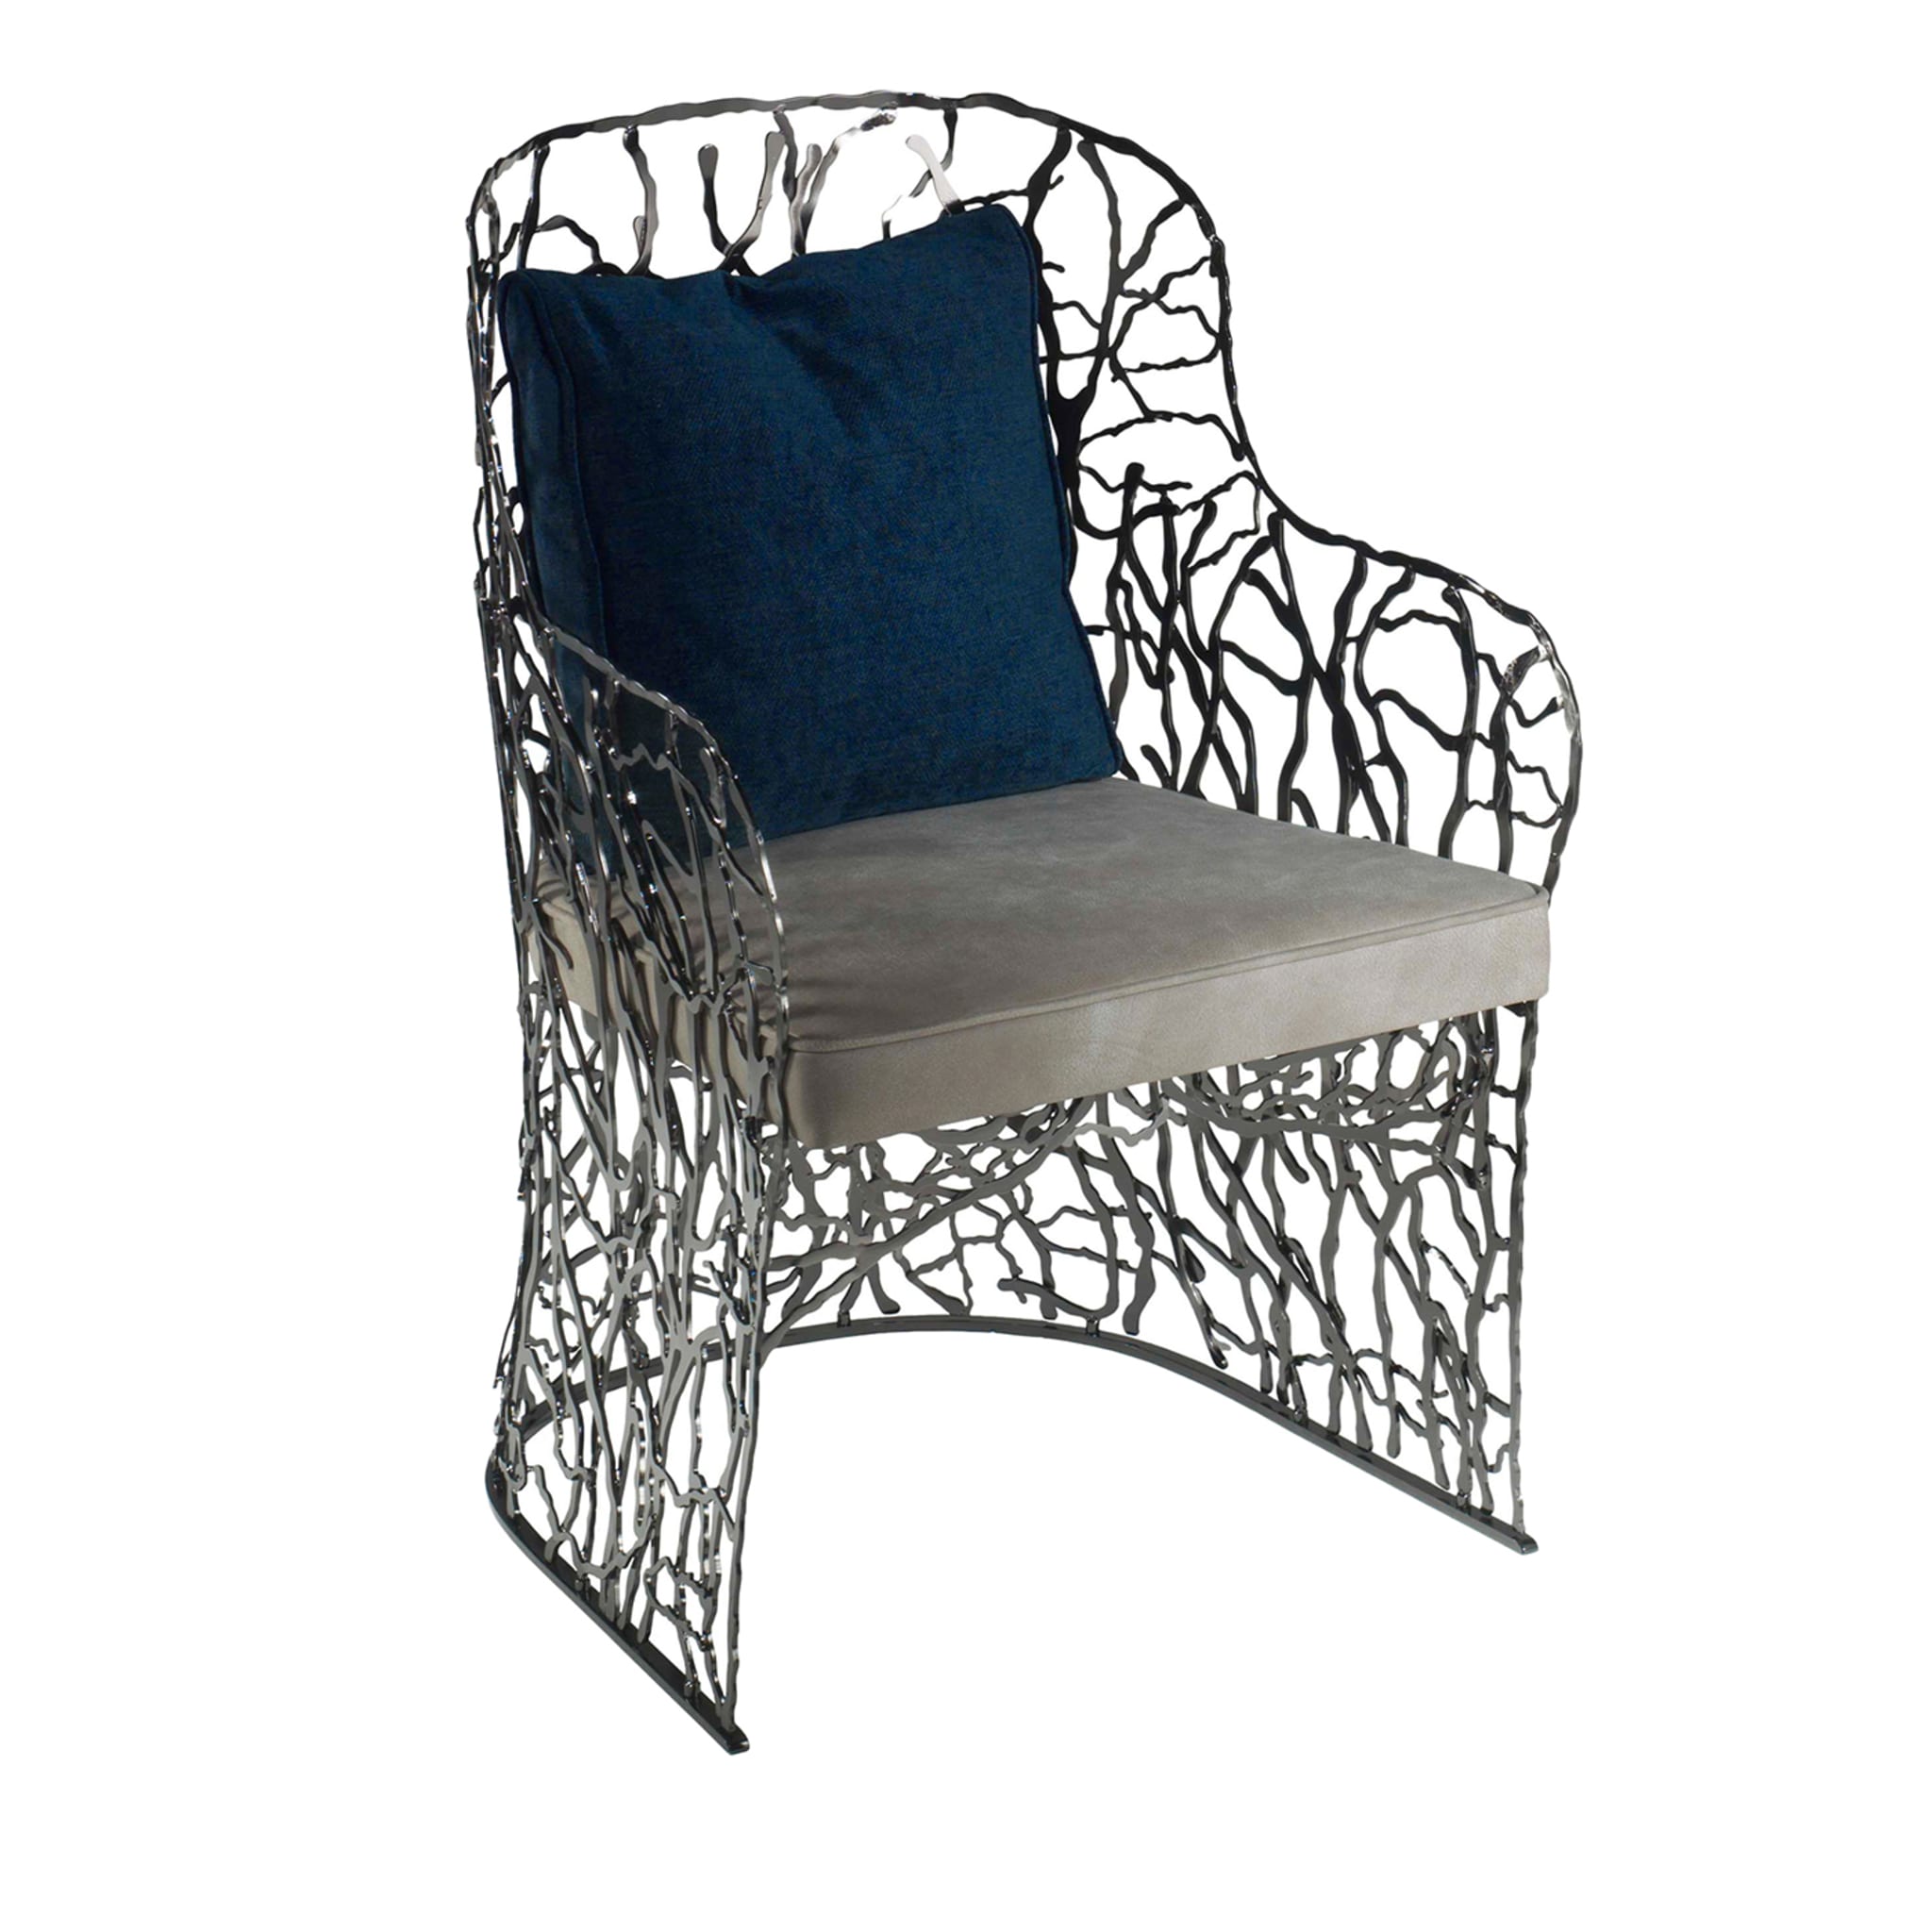 Primavera Steel-Finished Chair  - Main view